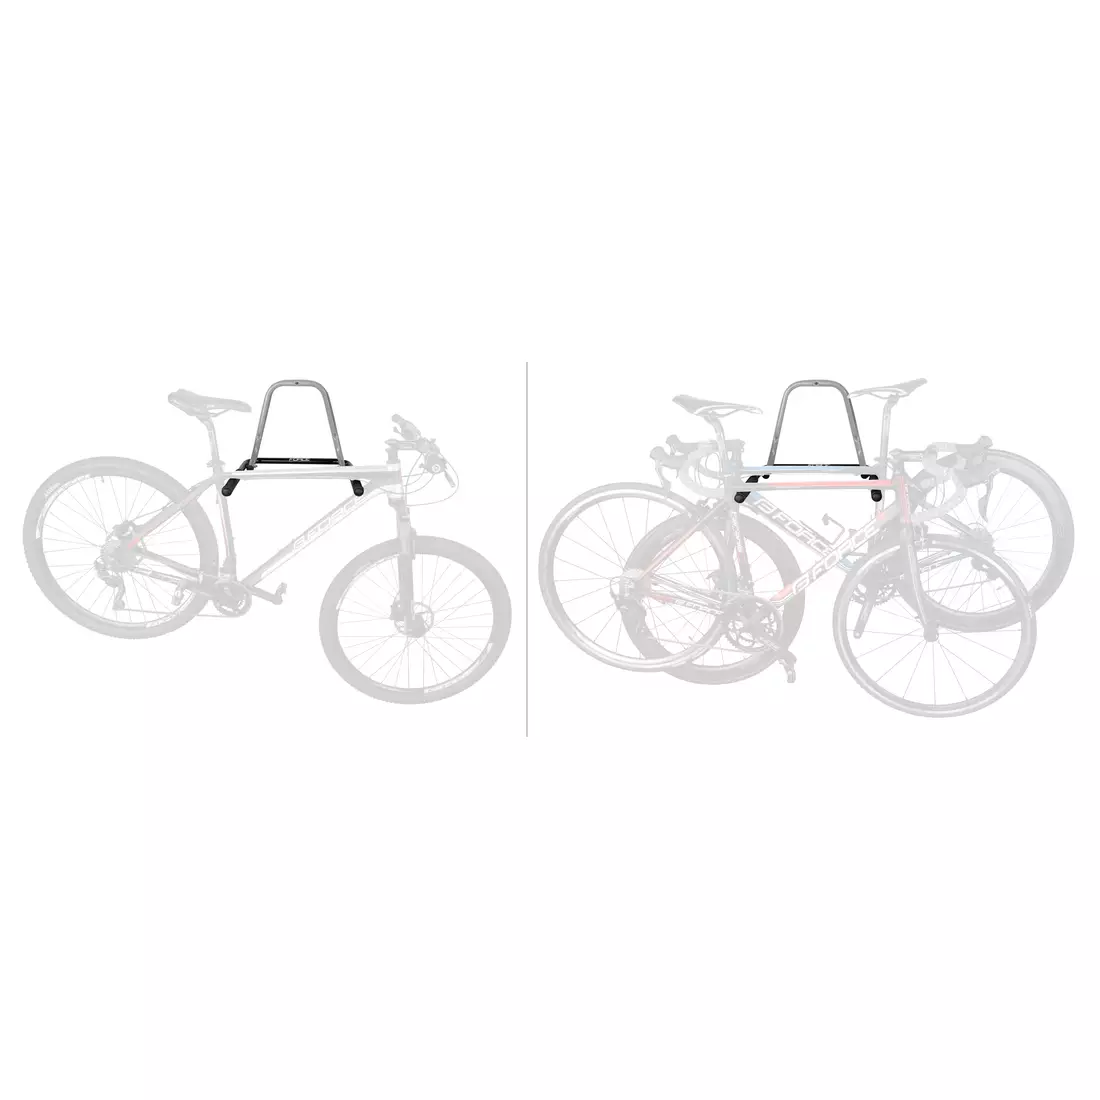 FORCE Wall hanger for 3 bicycles, foldable, gray-black 899485